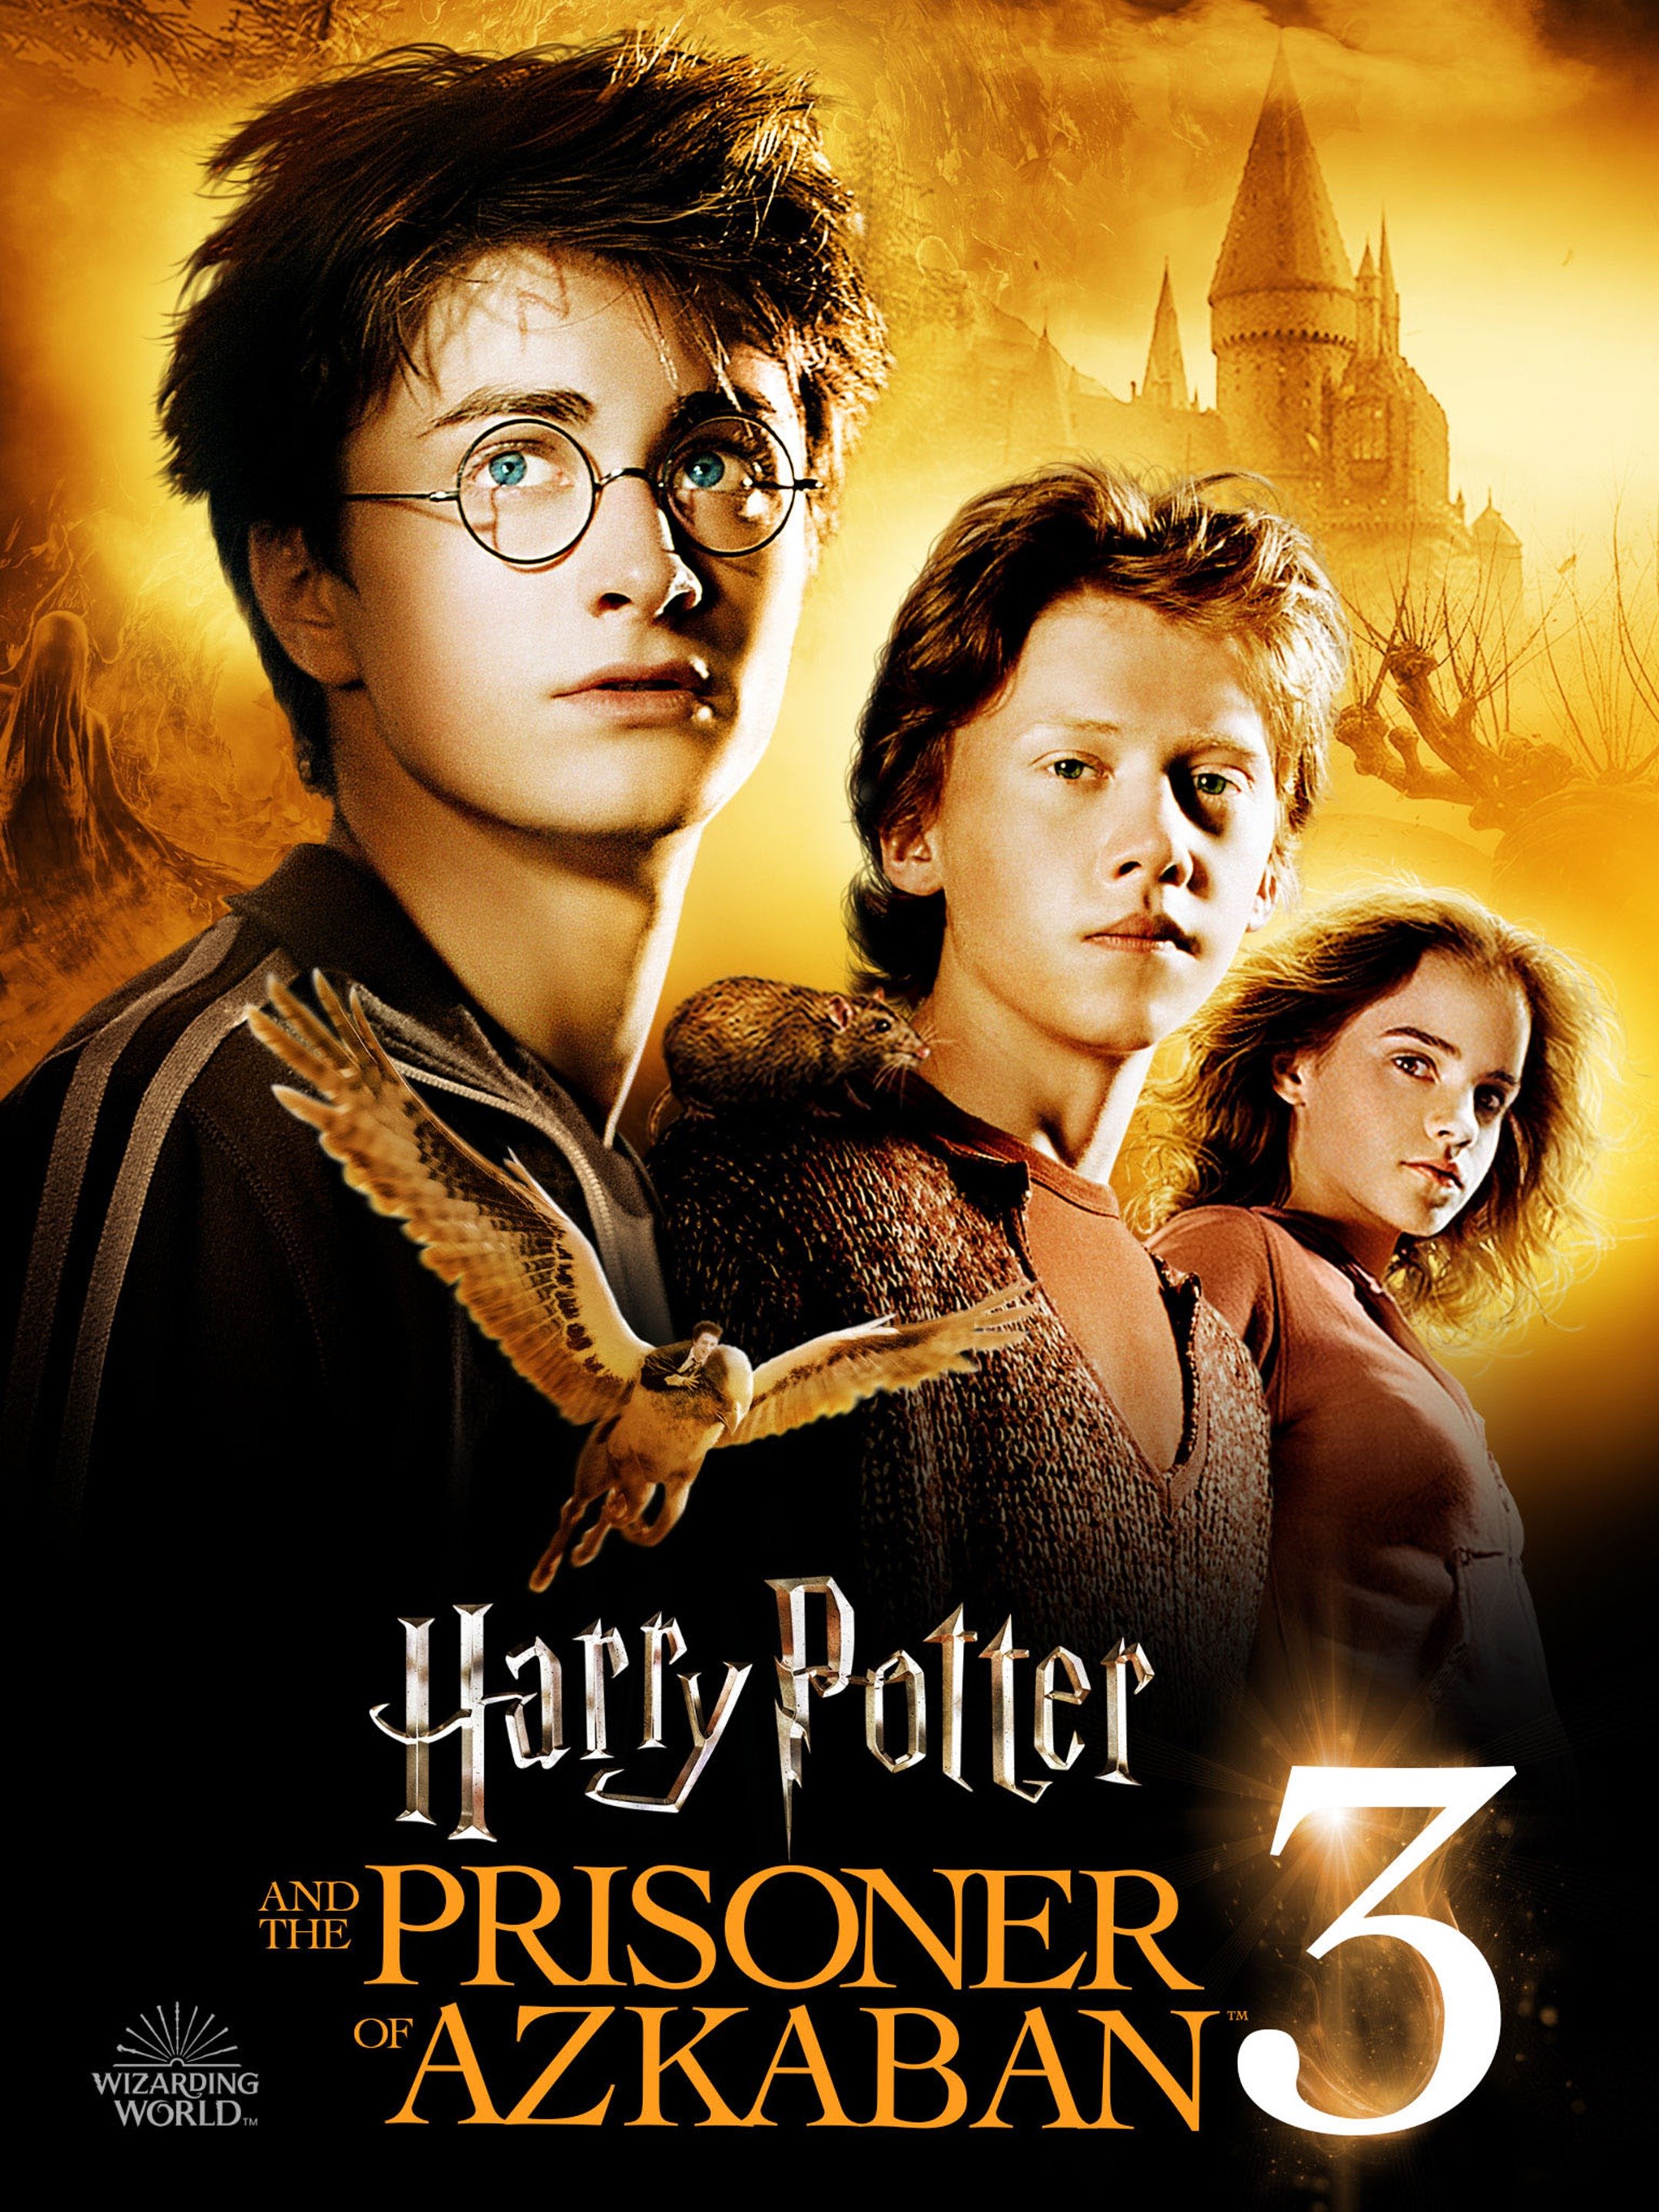 Harry Potter and the Prisoner of Azkaban Audience Reviews | MovieTickets